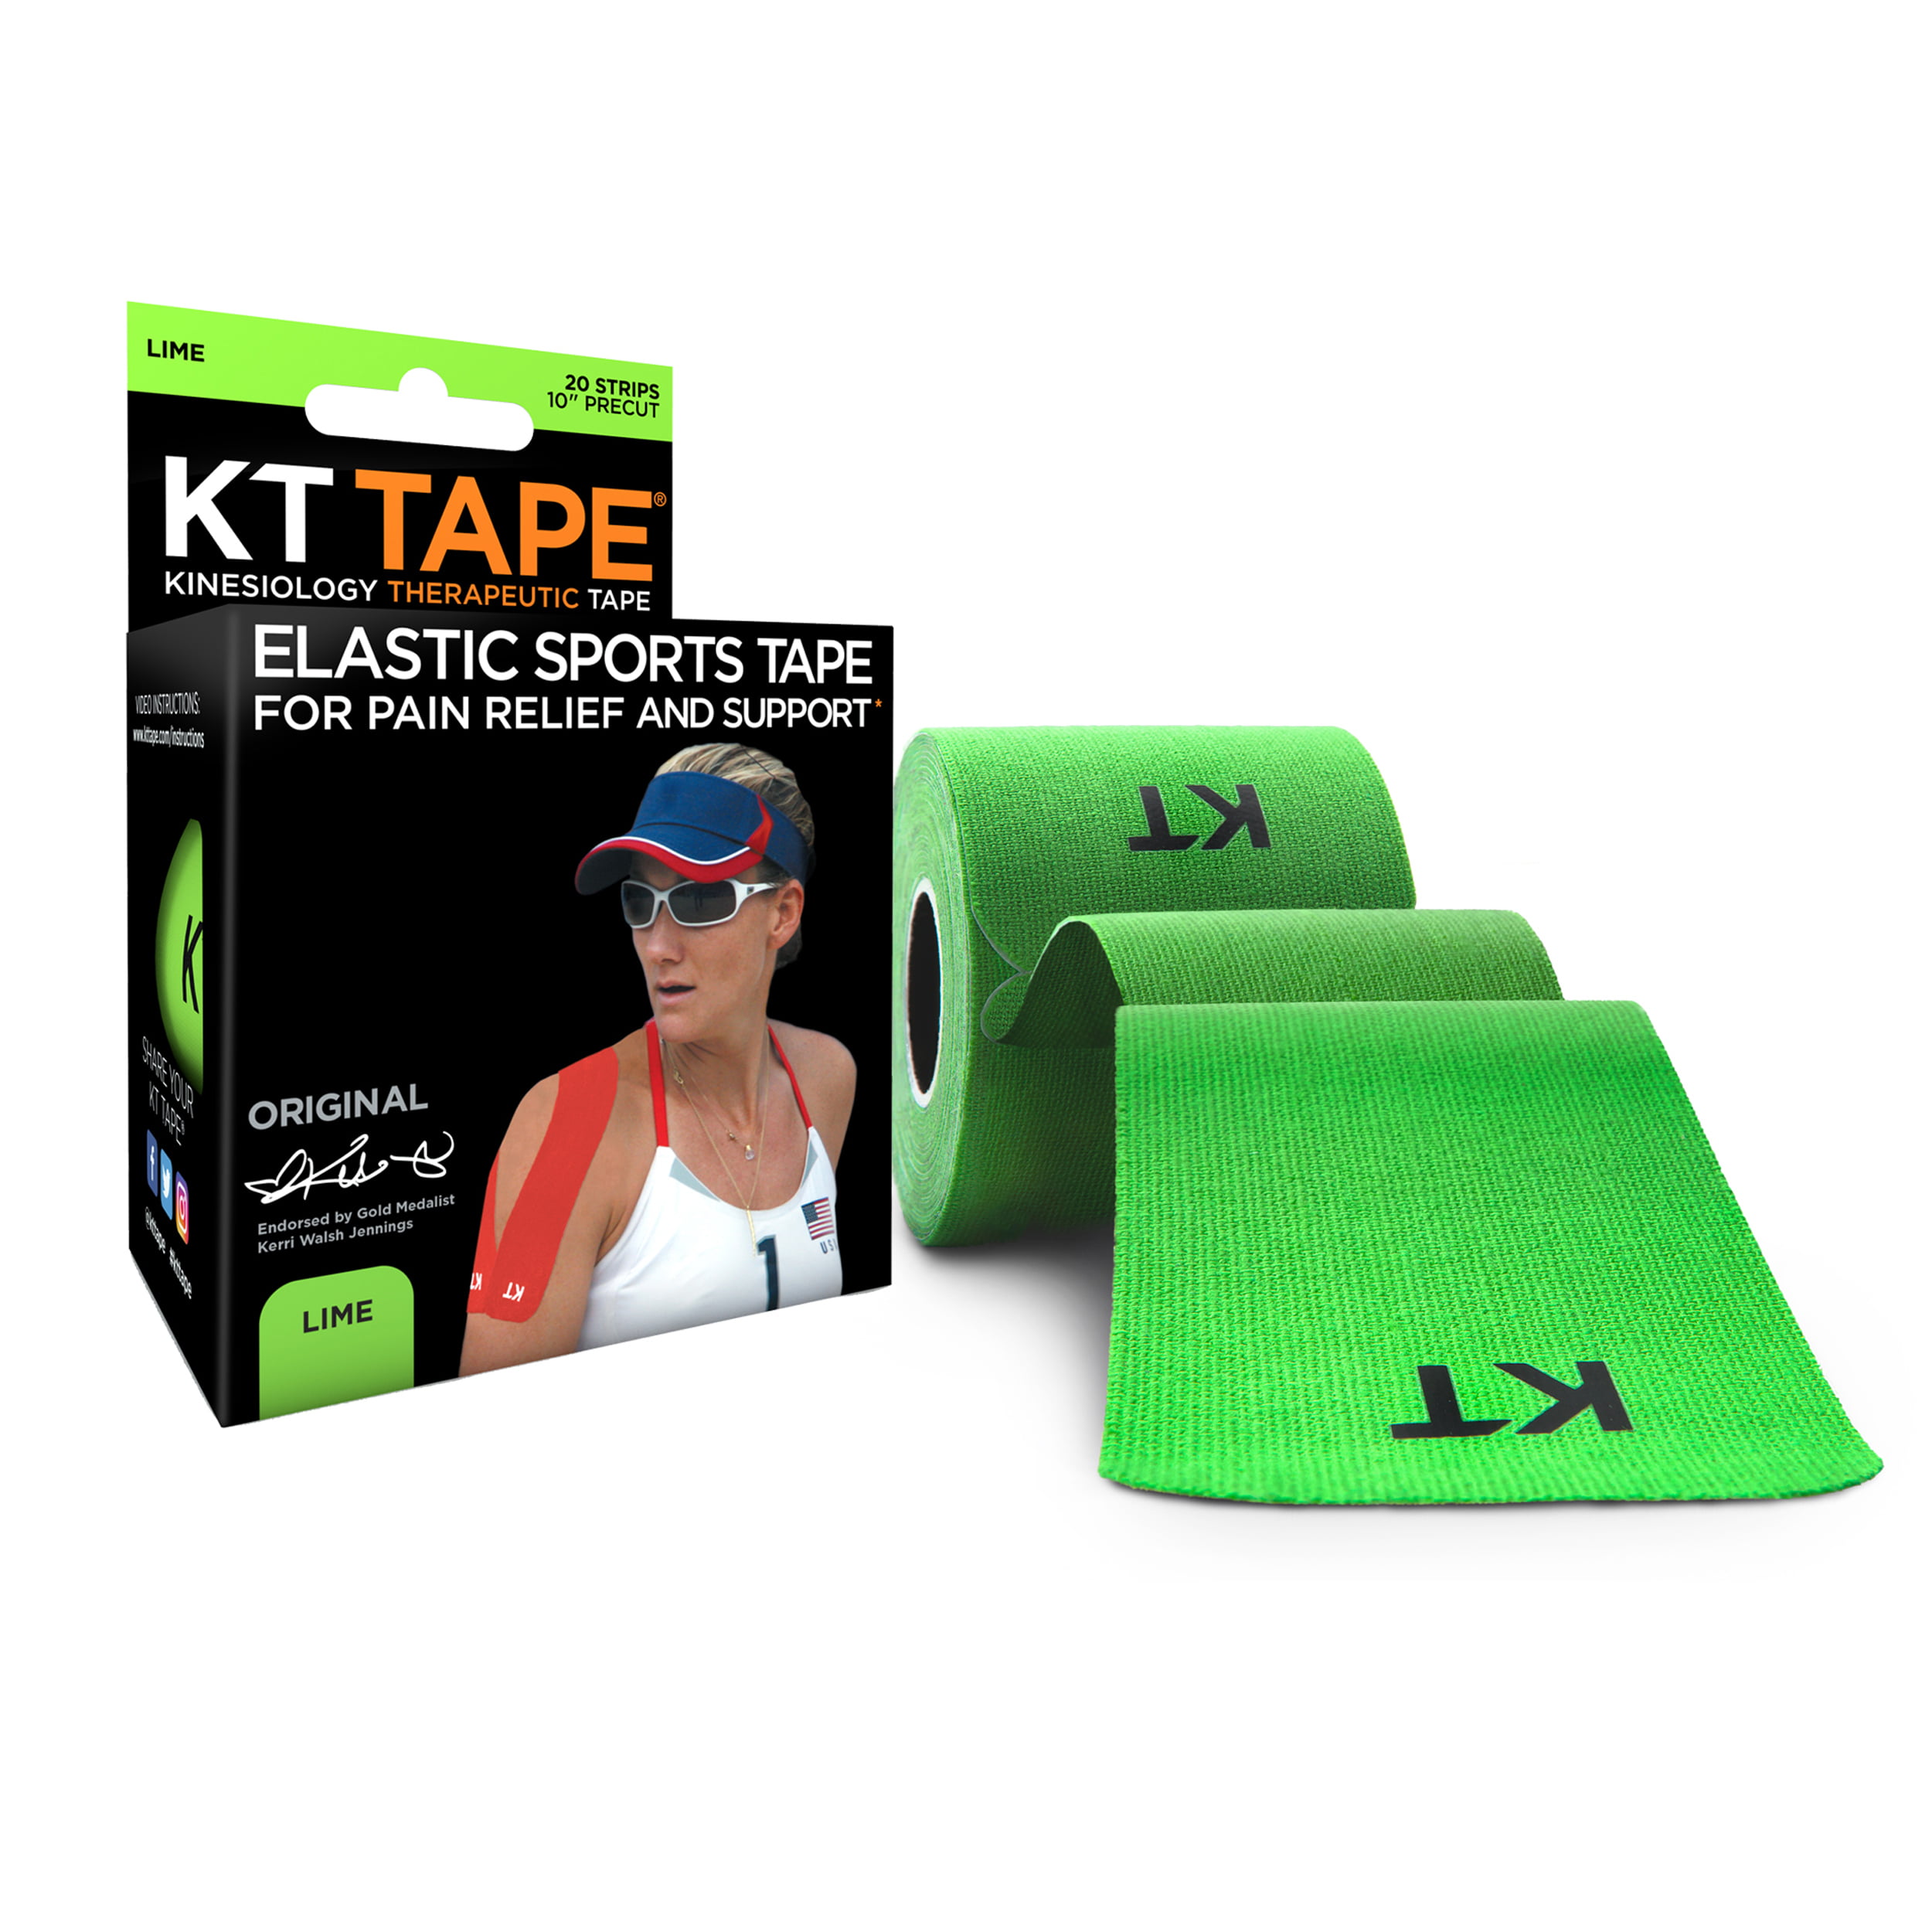 KT Tape Original 20 Strip Cotton Precut Kinesiology Tape FREE Next Day Delivery 